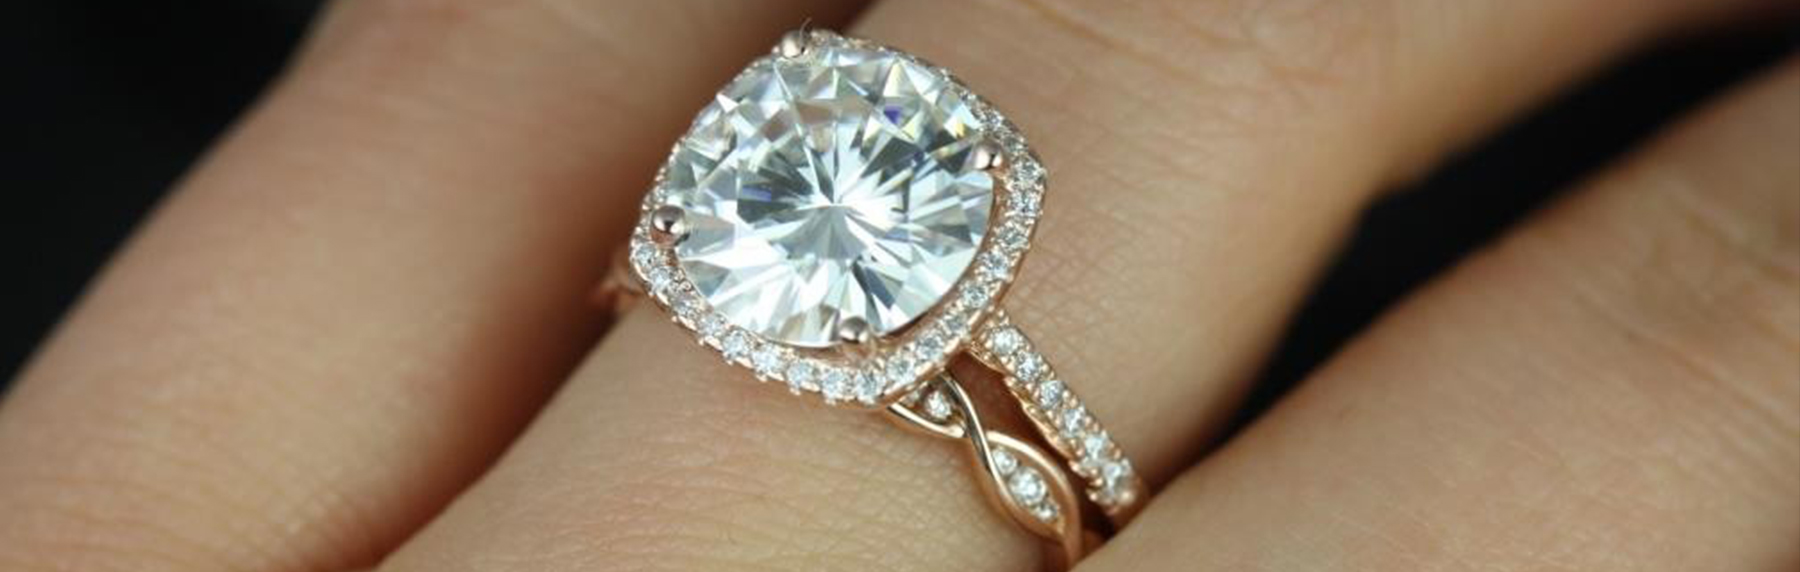 Planning to Propose to the Love of Your Life?